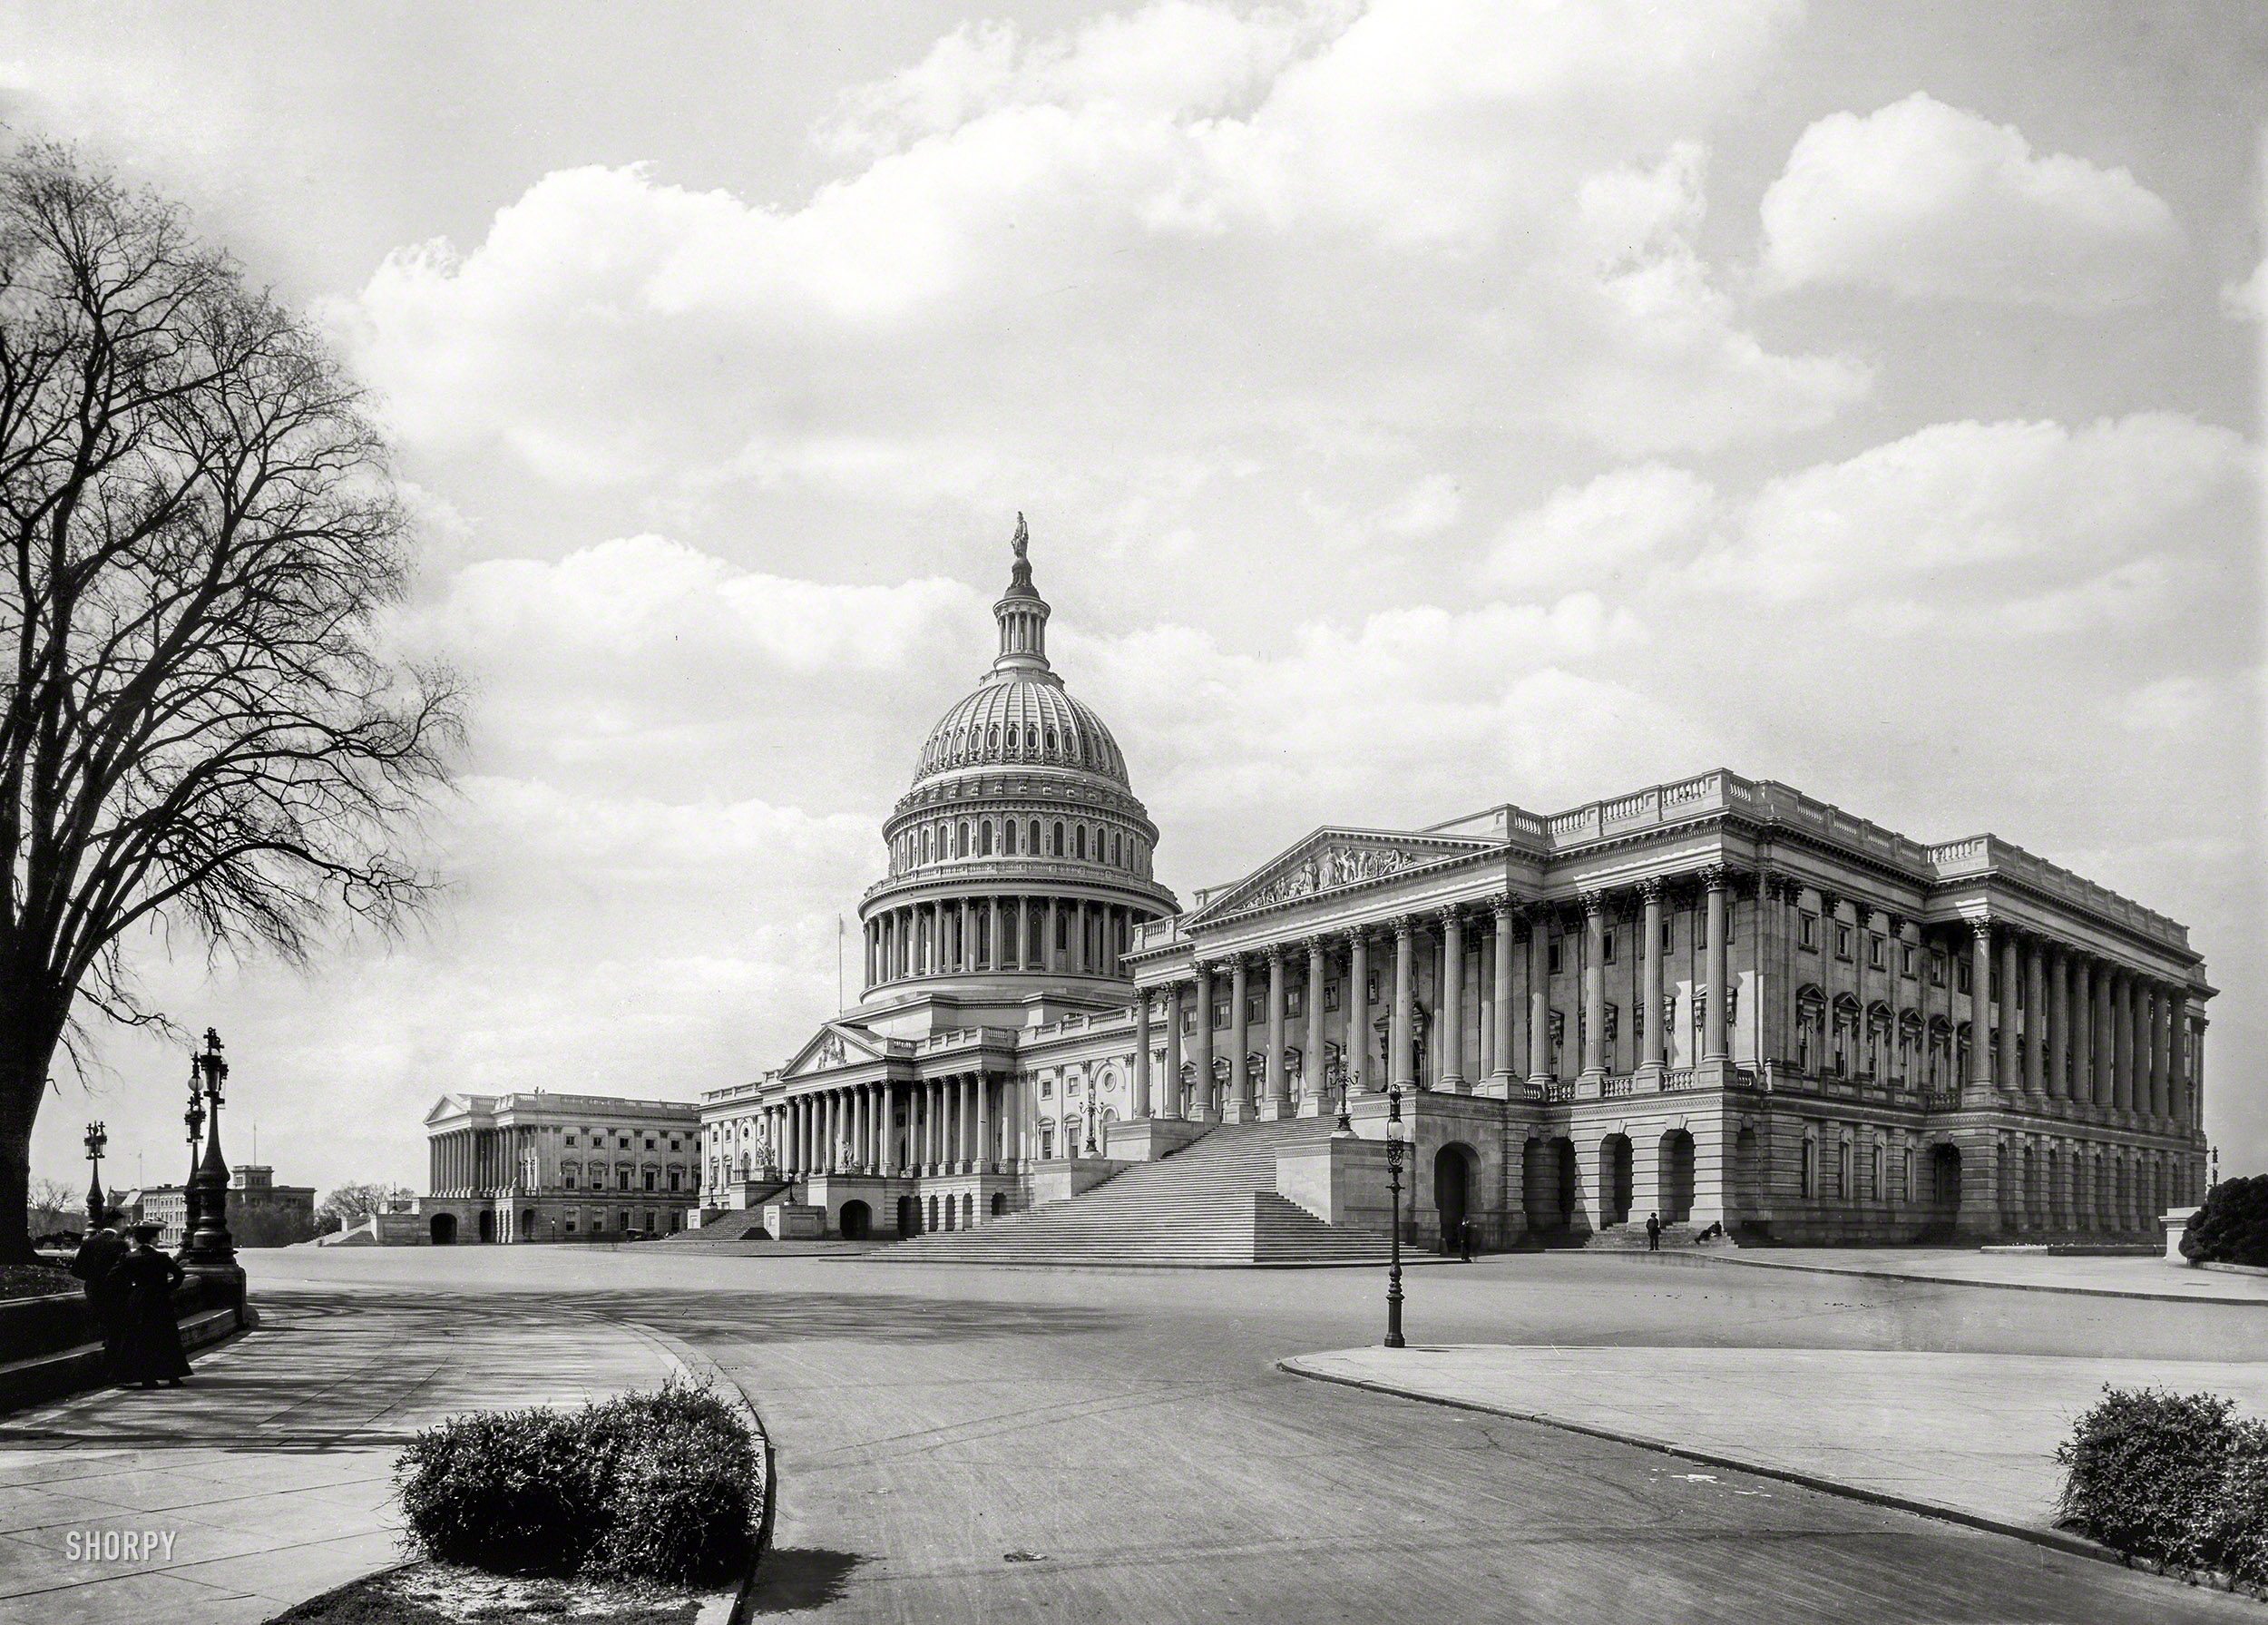 Circa 1905. "The Capitol at Washington -- East Front." The Senate wing is closest to the camera, with Thomas Crawford's sculpture The Progress of Civilization decorating the pediment atop the portico; the House of Representatives pediment at far left is blank; it would eventually be filled by Paul Bartlett's sculpture Apotheosis of Democracy, dedicated in 1916. 8x10 glass negative. View full size.